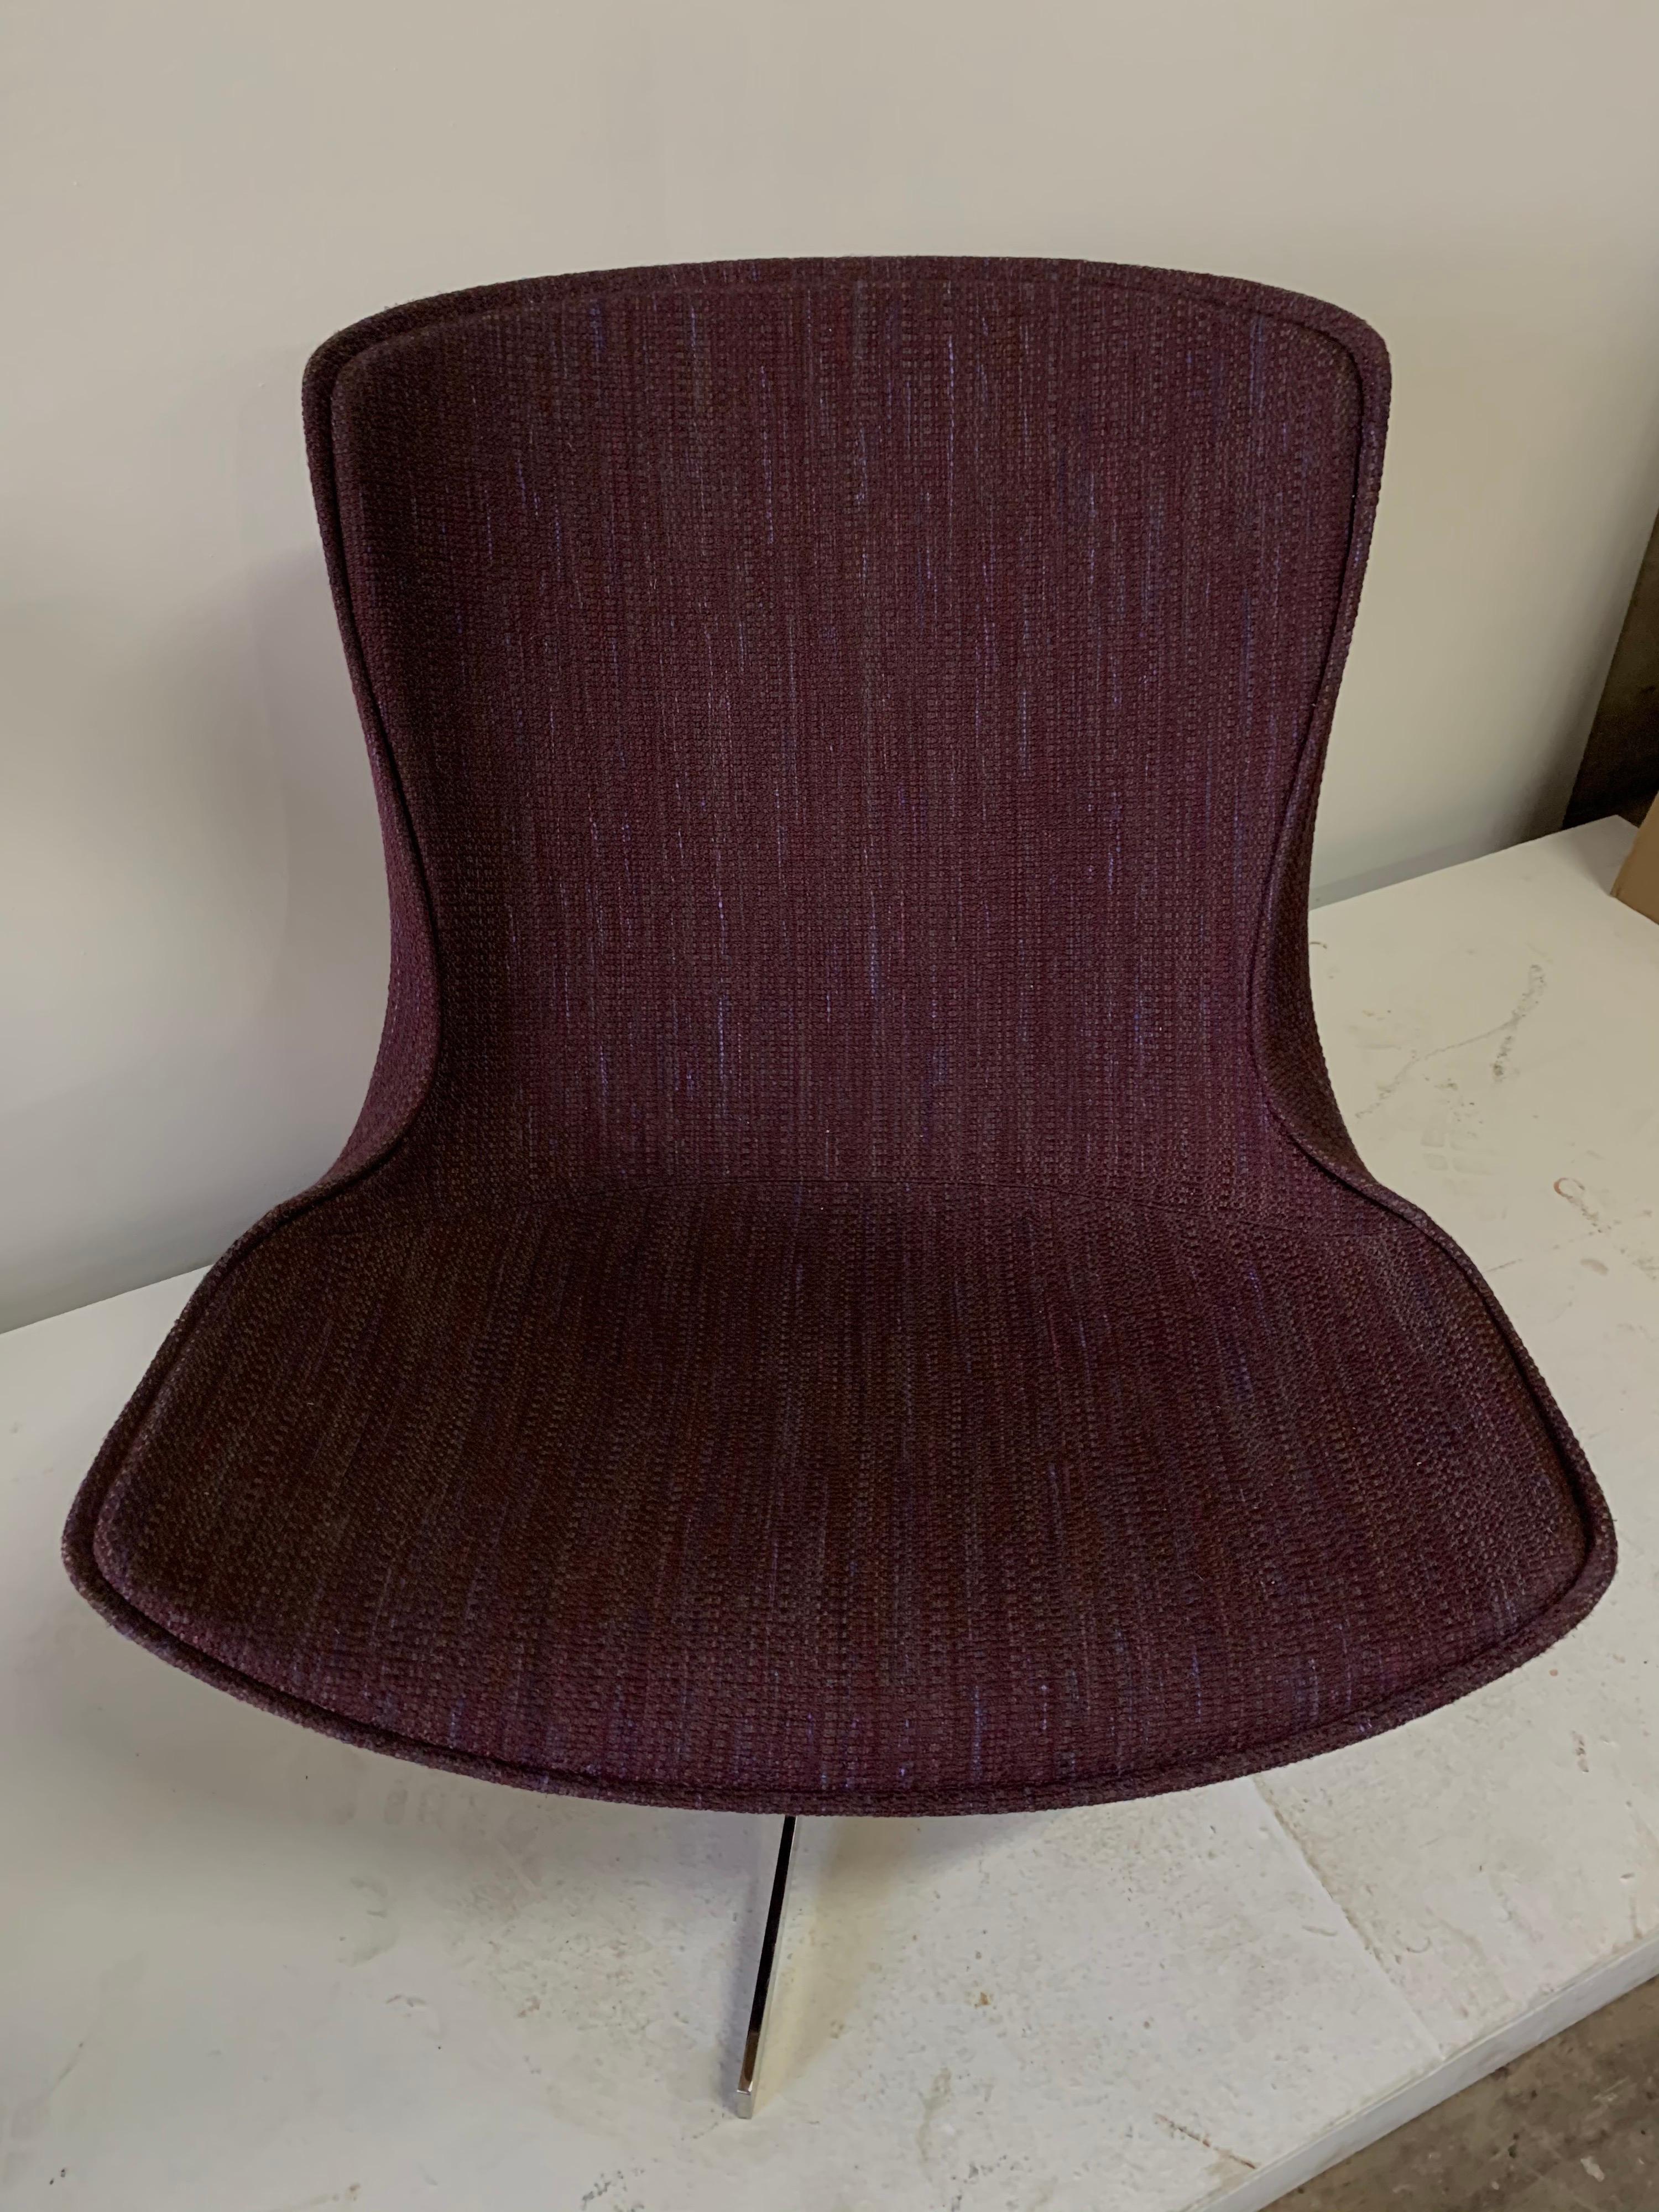 Nicos Zographos Style Midcentury Swivel Chairs, Pair For Sale 7